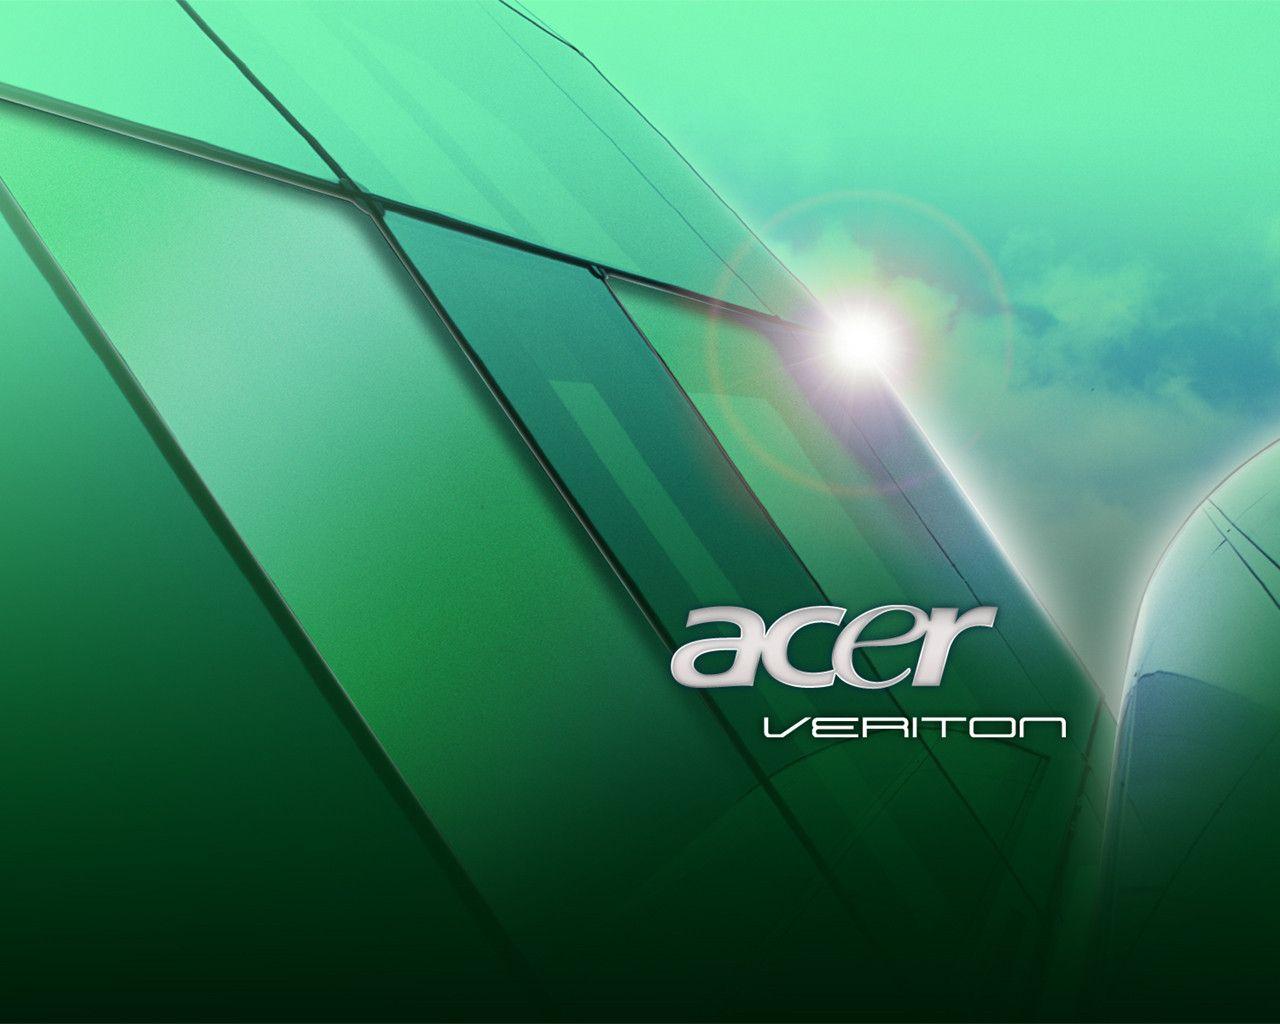 Acer Veriton Wallpapers 2015 - Wallpaper Cave